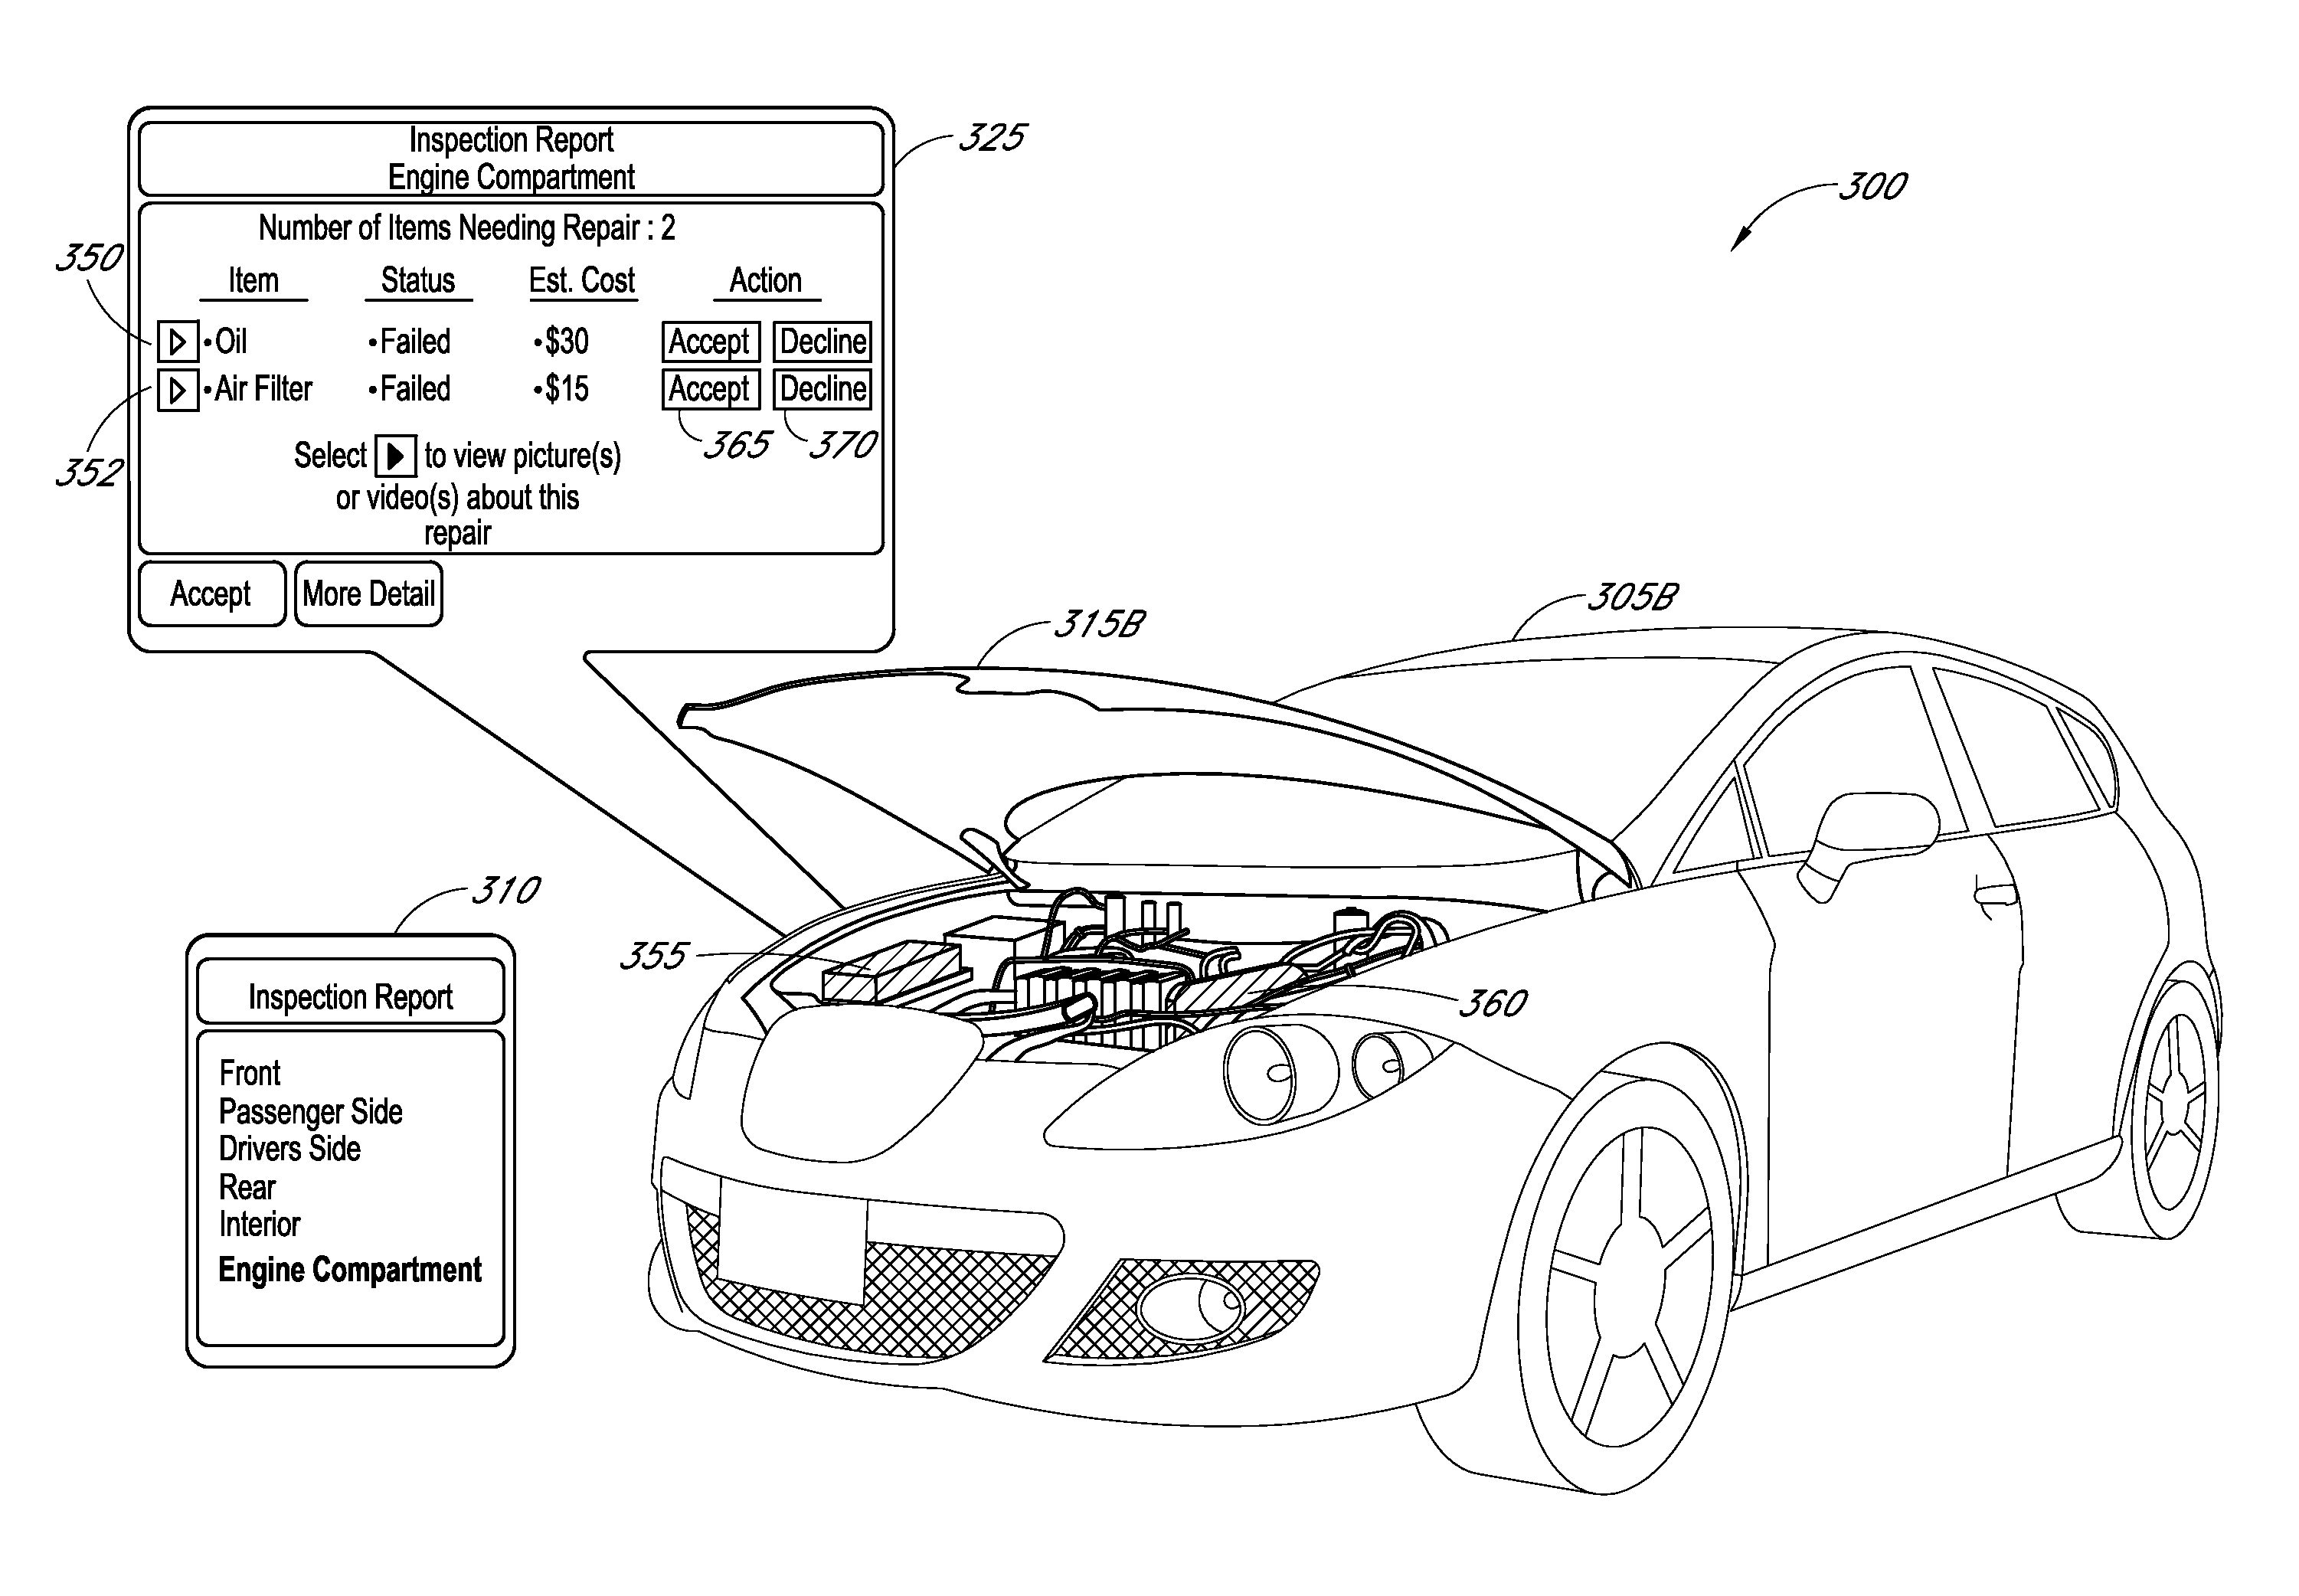 Inspection reporting including a 3D vehicle model